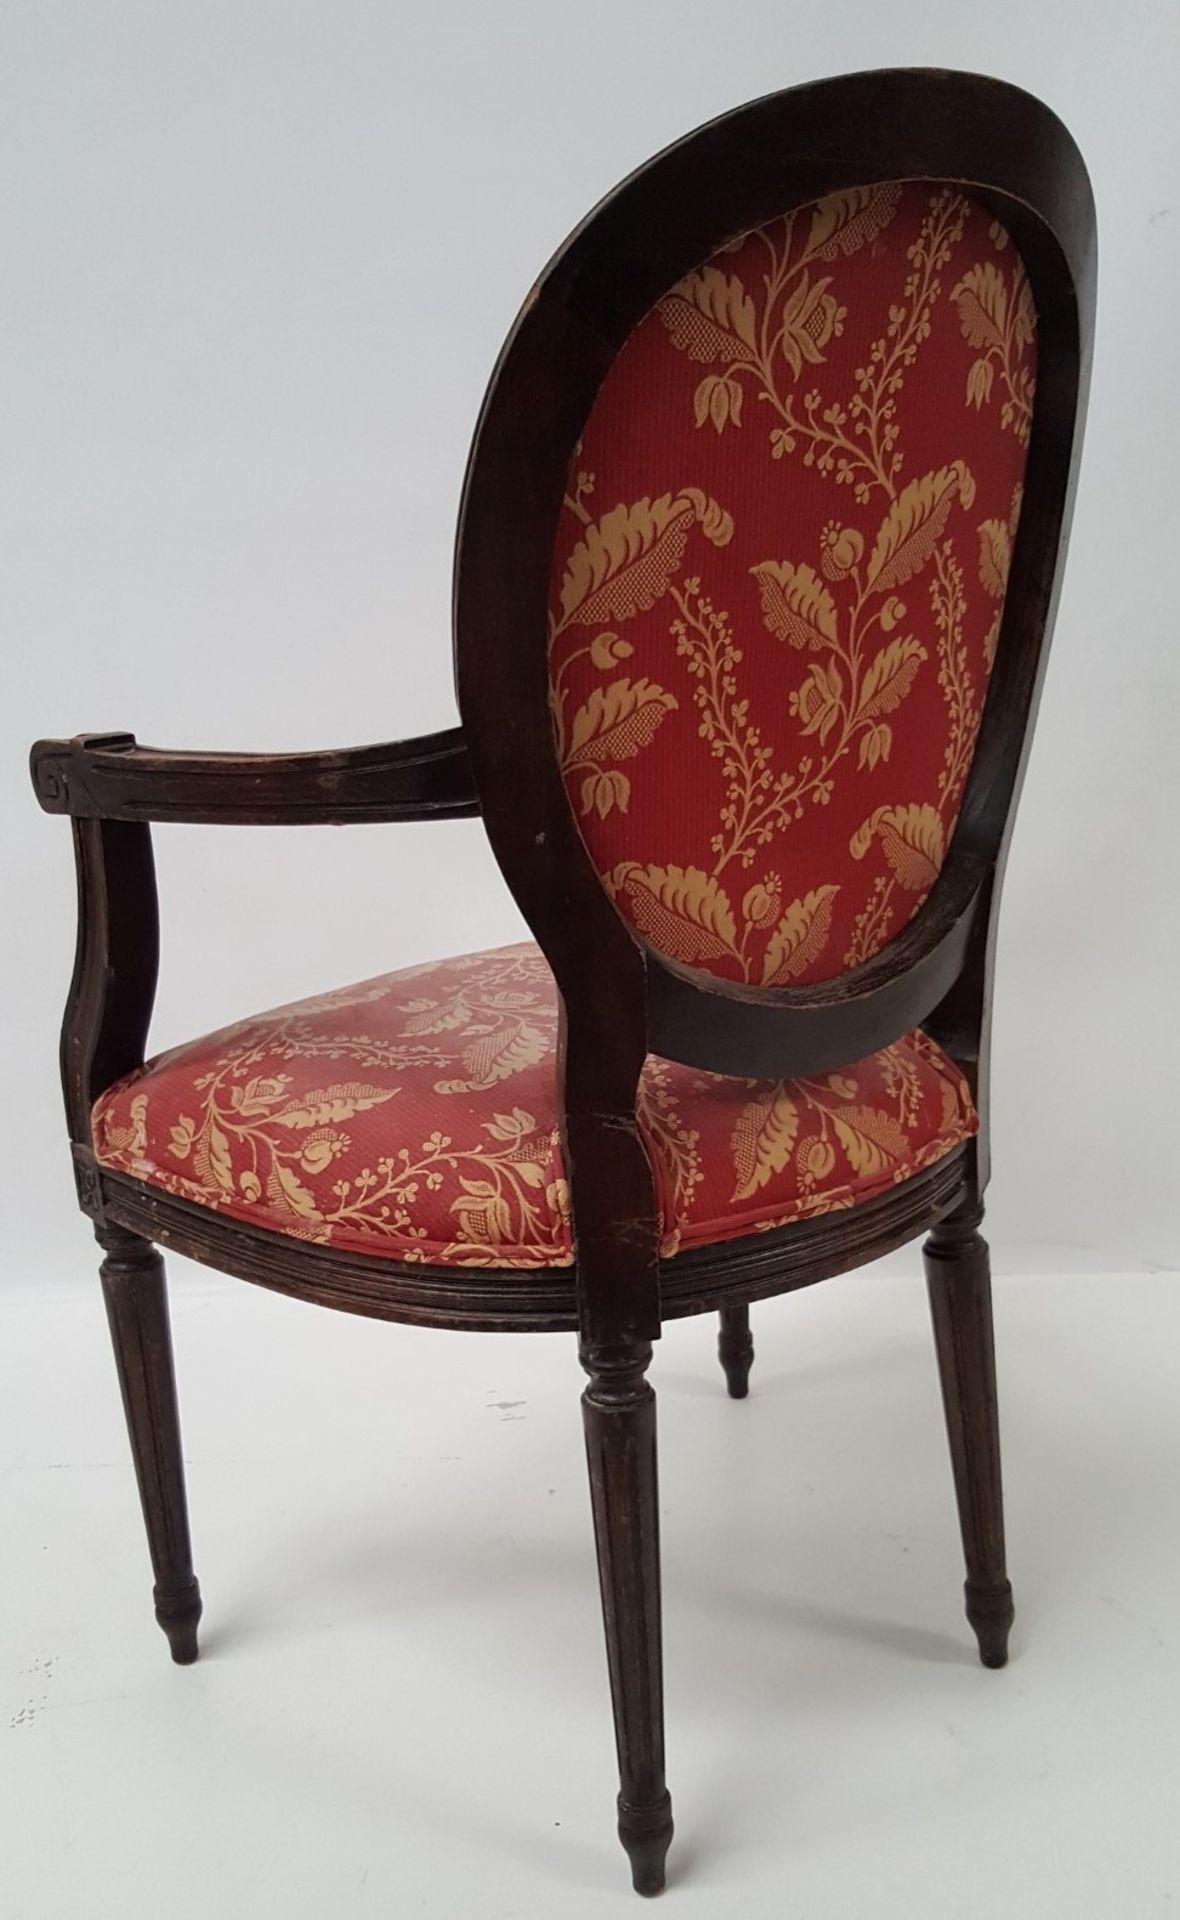 8 x Vintage Wooden Chairs Featuring Spindle Legs, And Upholstered In Red / Gold Floral Fabric - - Image 7 of 8